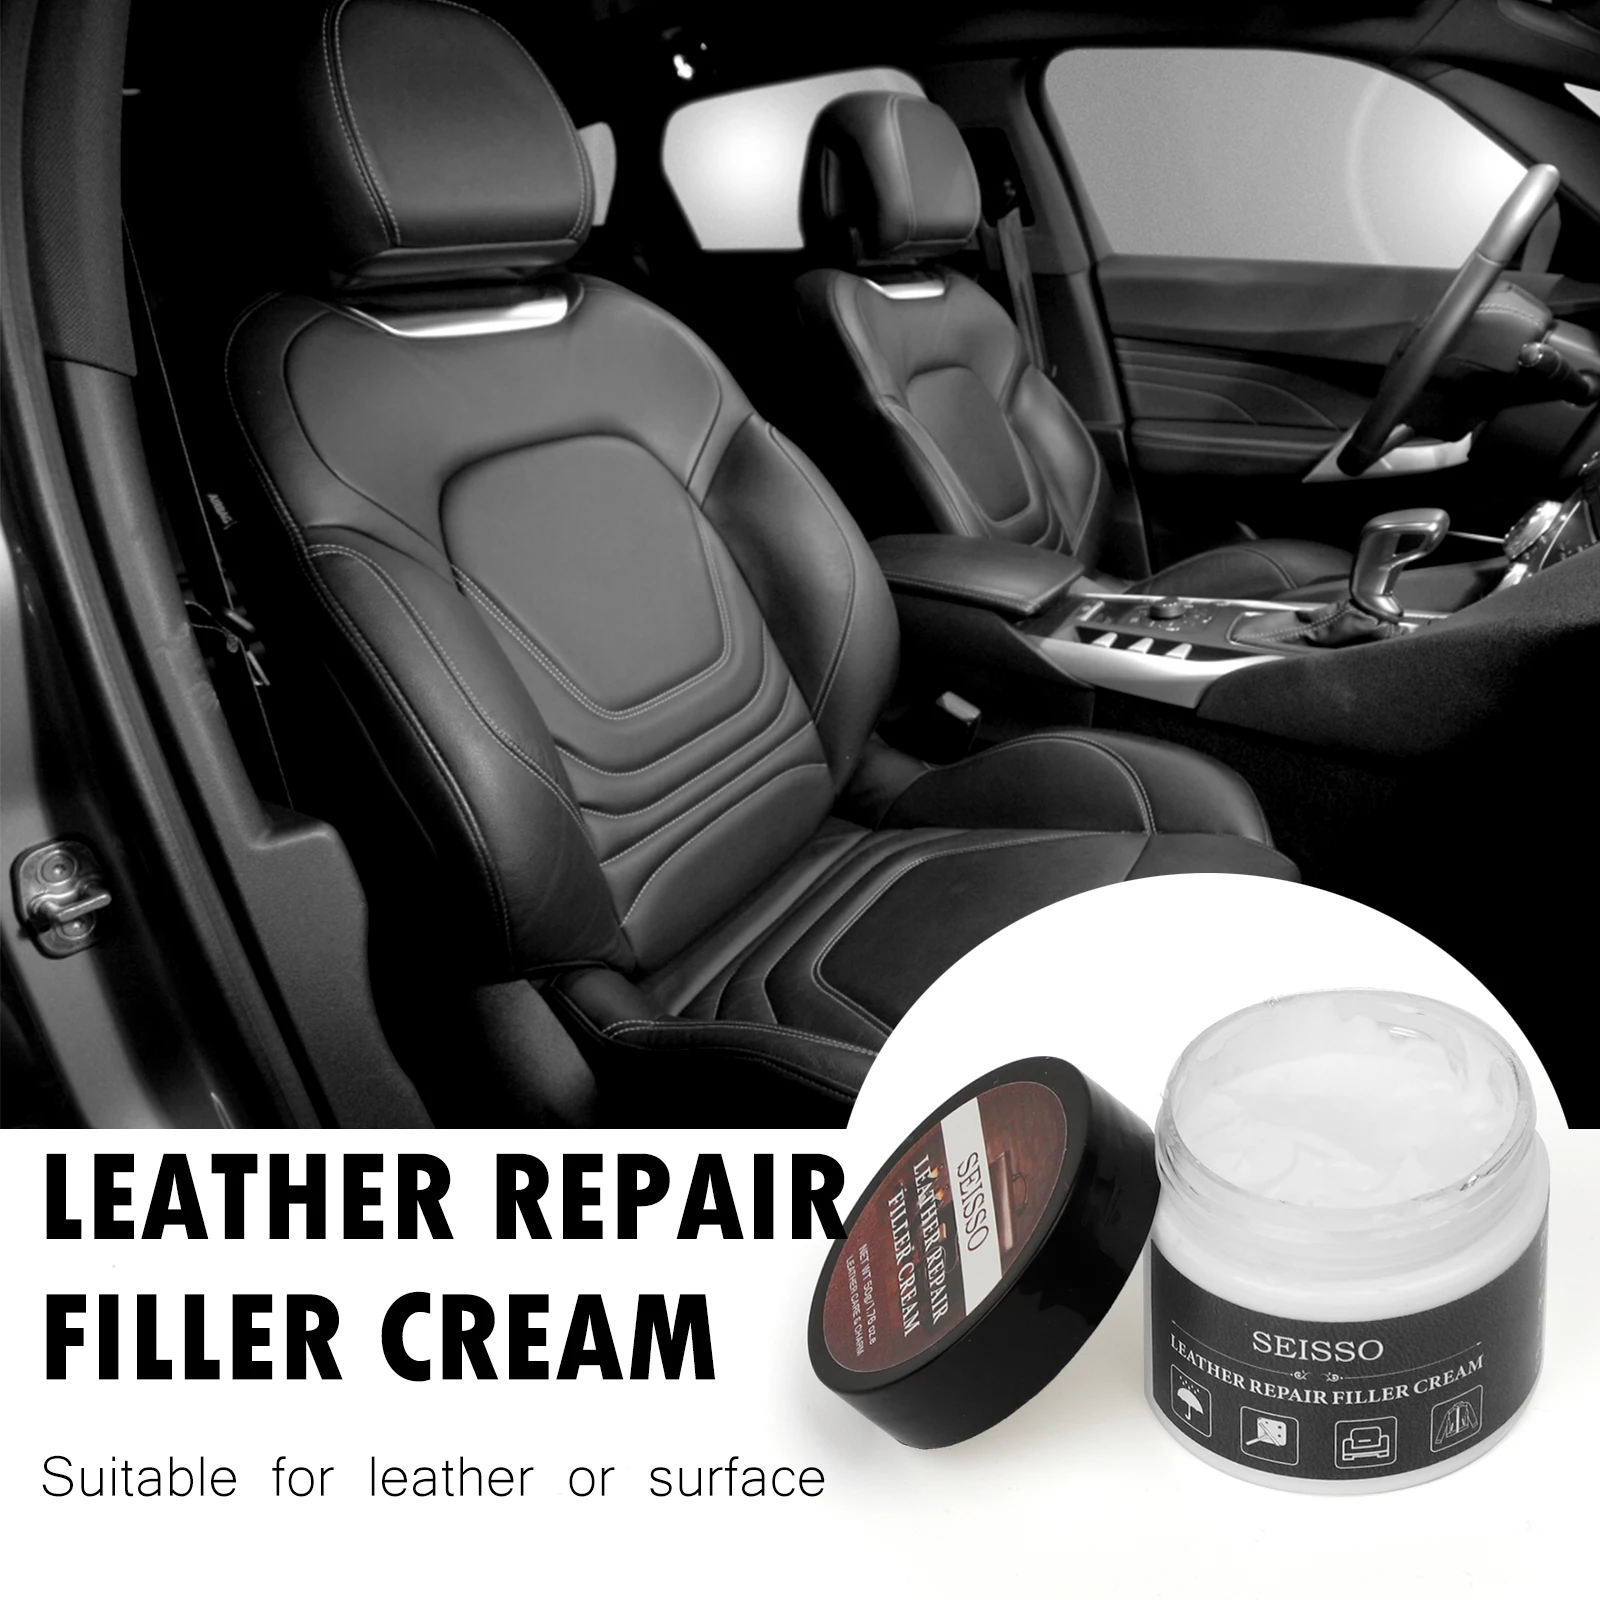  SEISSO Leather Repair Kits for Couches, Restoring